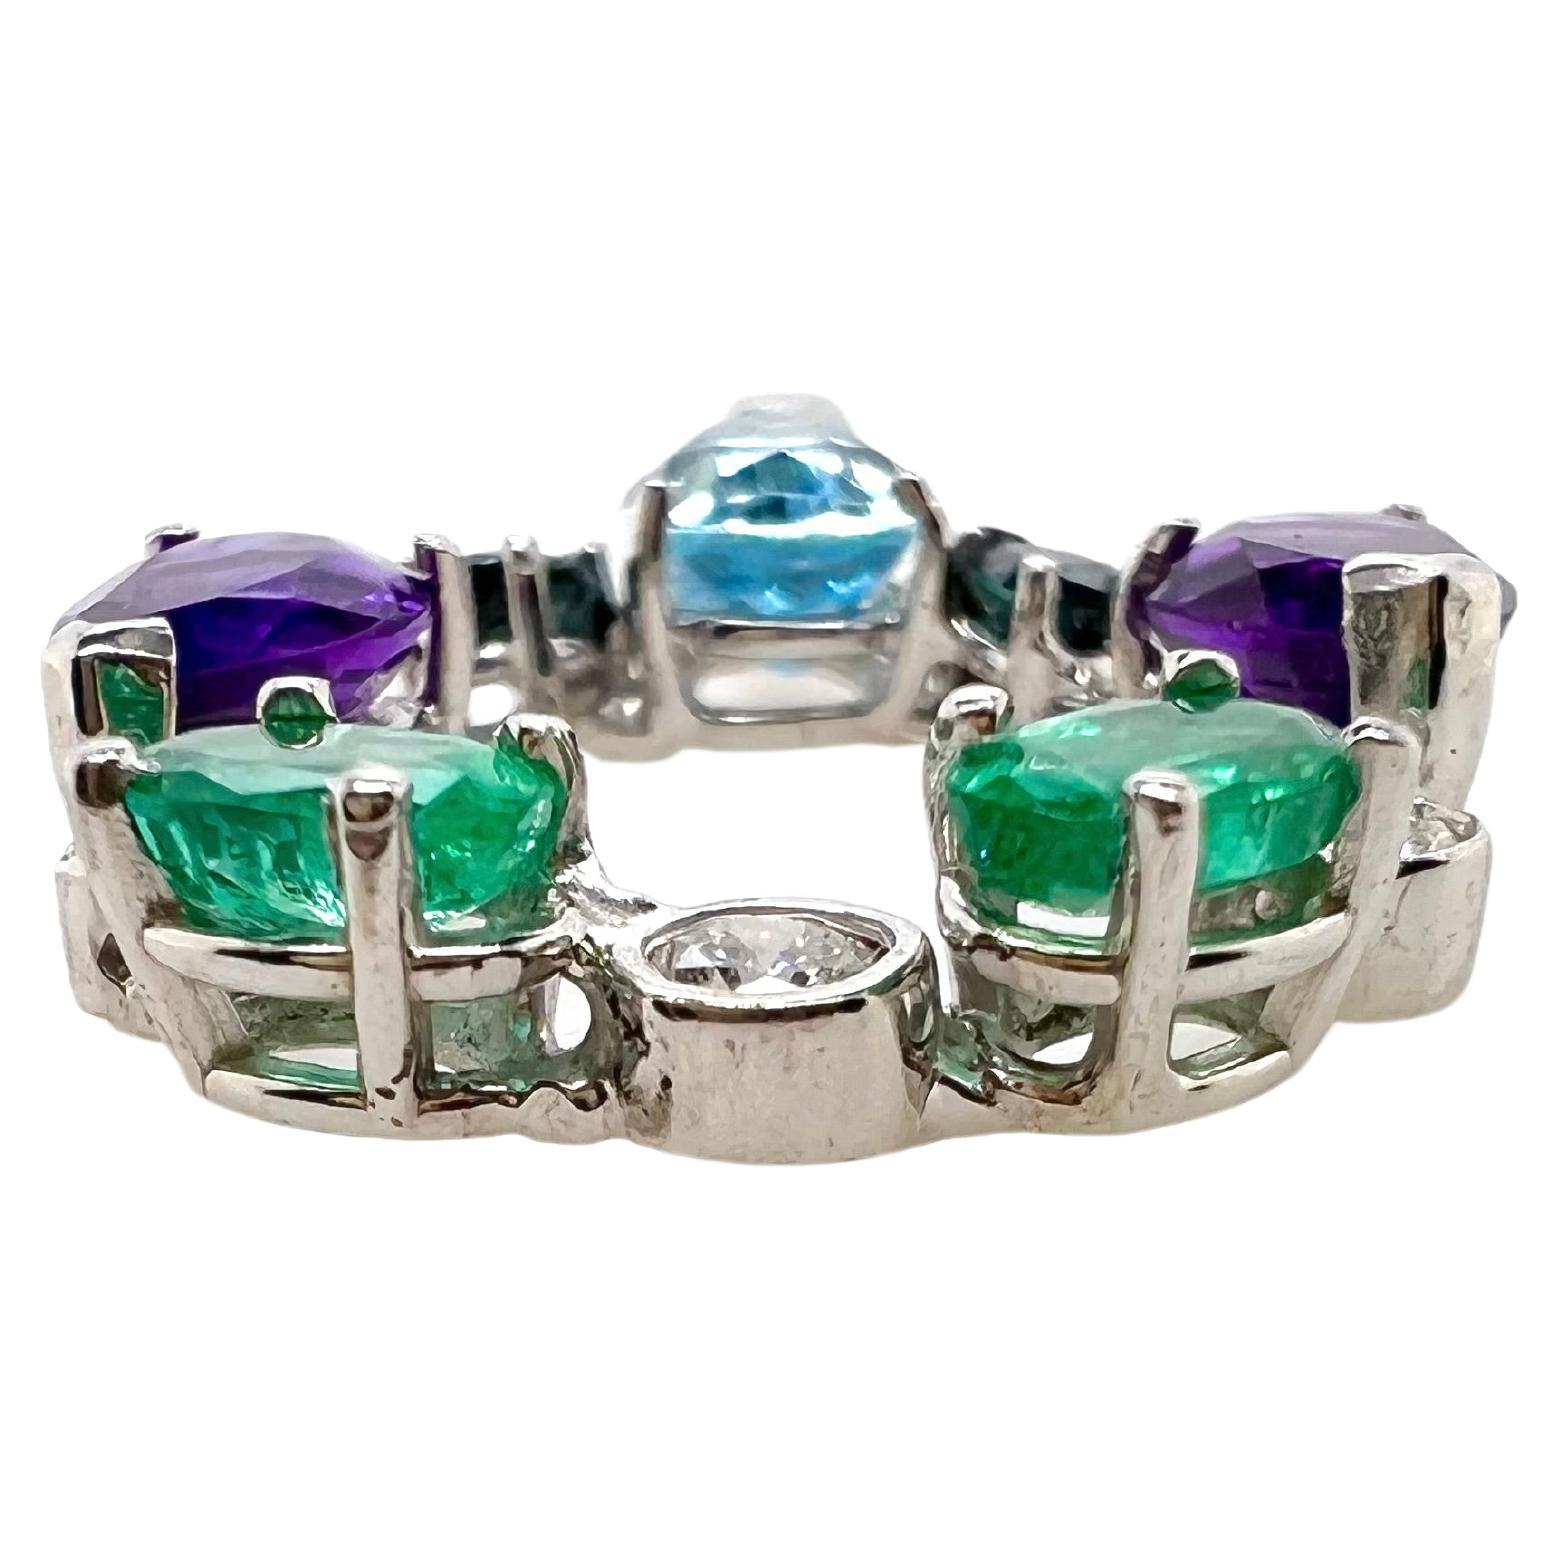 This unique circular shaped pendant is made up for a color array emeralds, amethyst, diamonds, aquamarine, and sapphires.  The stones are arranged to give a beautiful circular motif pendant that will grasp everyone's attention!


Miscellaneous